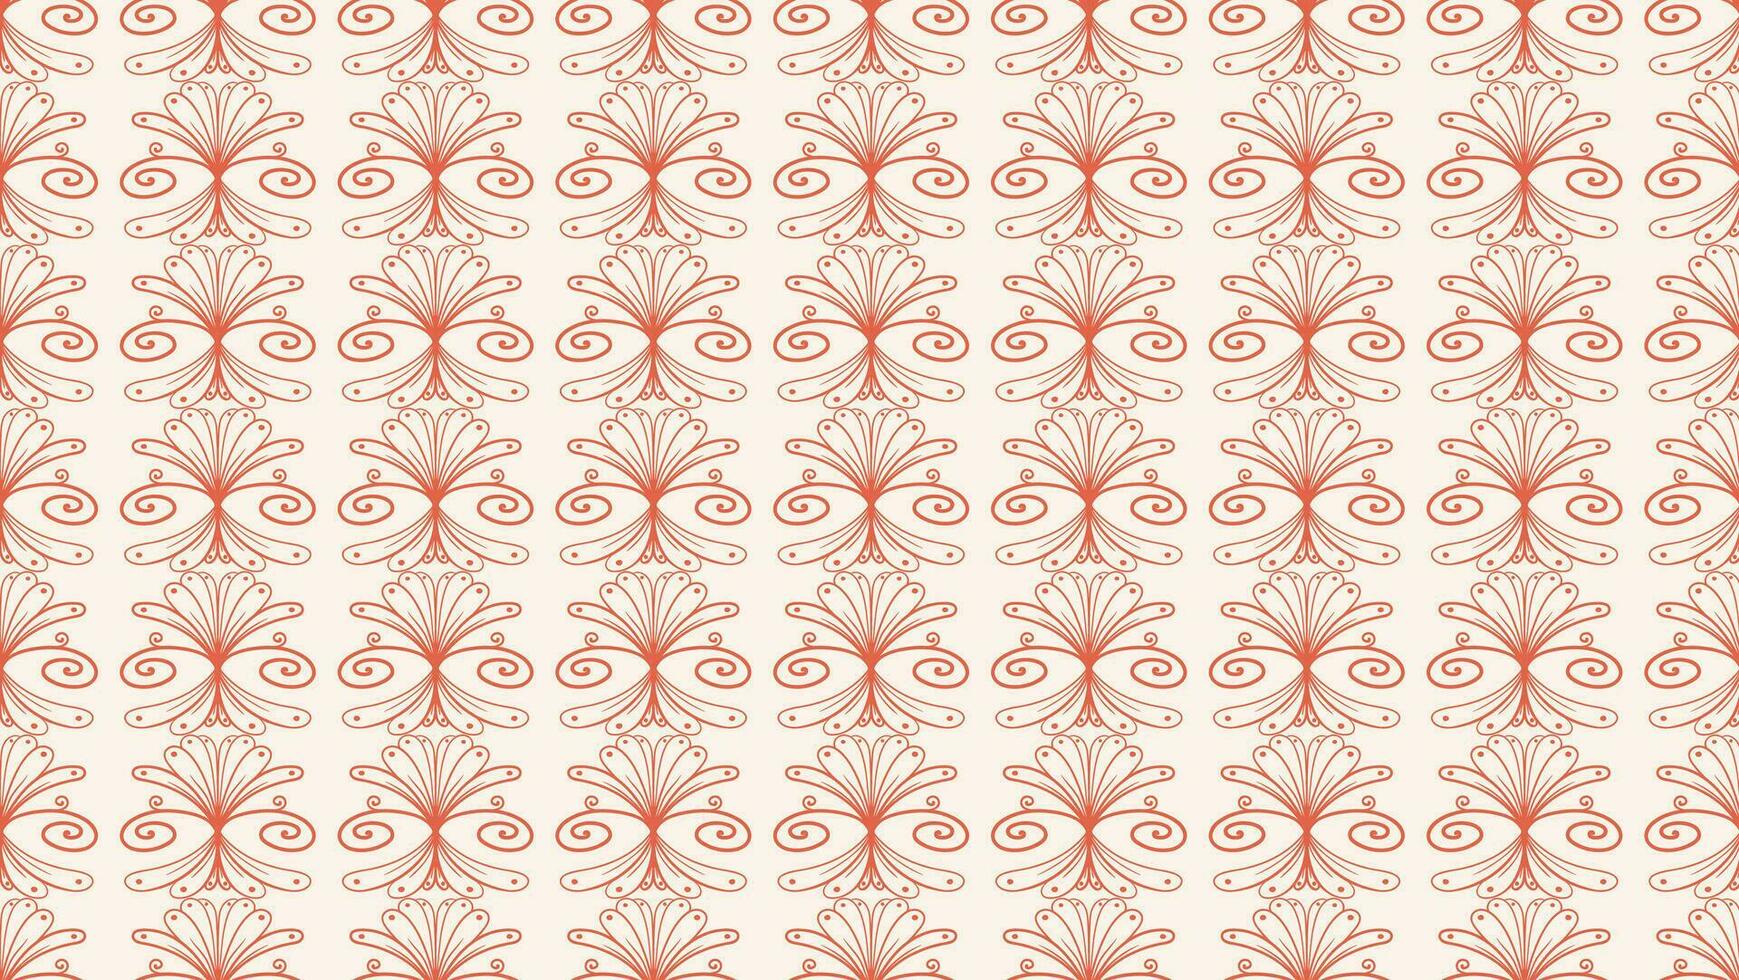 Damask seamless pattern background. Classical old fashioned damask ornament. For backgrounds, wallpapers, textiles, and fashion. vector